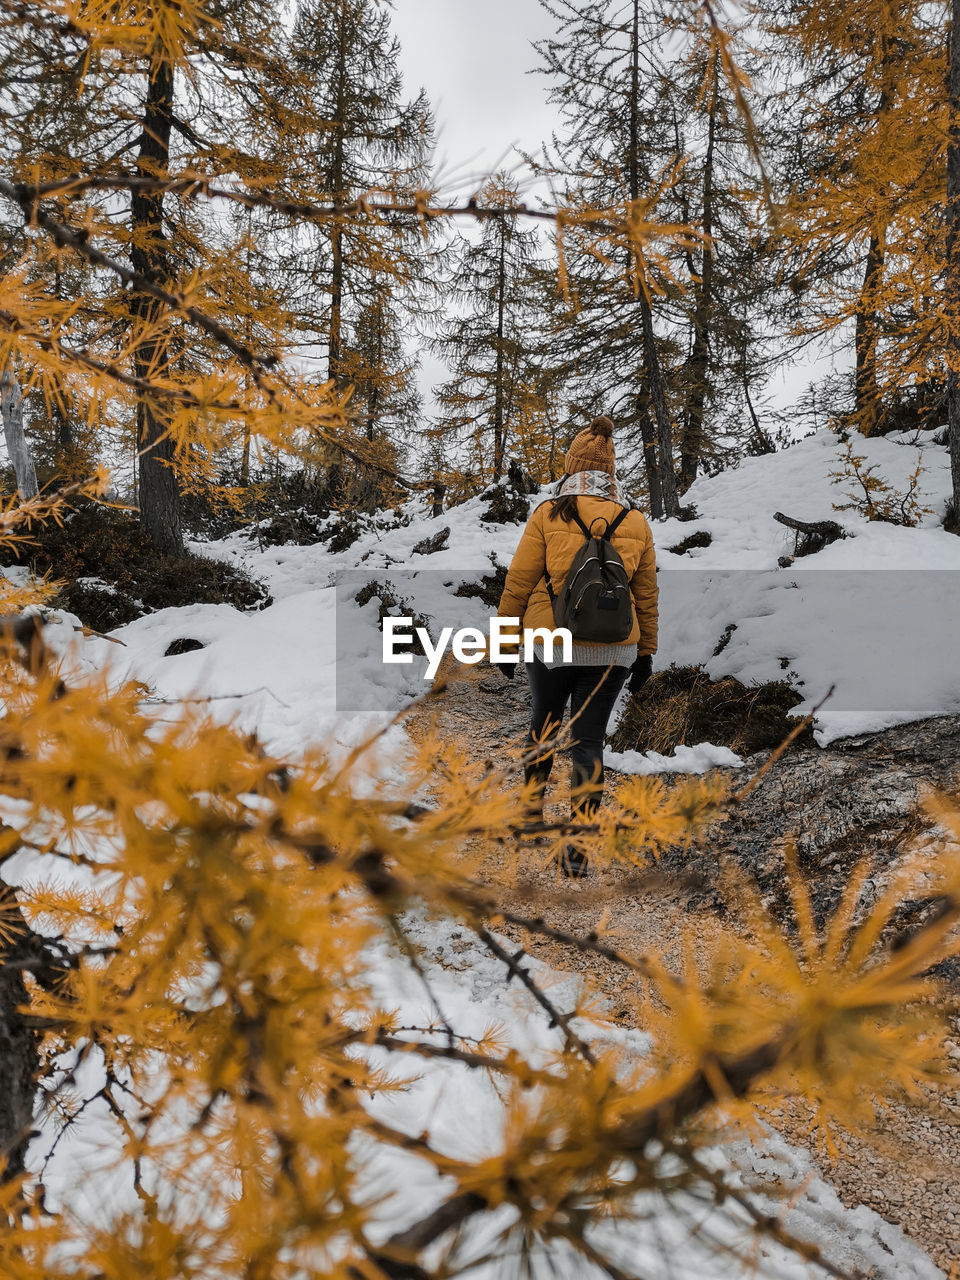 winter, tree, snow, cold temperature, autumn, wilderness, nature, plant, leisure activity, forest, land, one person, beauty in nature, men, hiking, adult, leaf, footwear, warm clothing, day, full length, clothing, mountain, activity, scenics - nature, adventure, environment, outdoors, pinaceae, coniferous tree, lifestyles, walking, non-urban scene, pine tree, person, travel, holiday, pine woodland, backpack, sports, landscape, vacation, trip, woodland, sky, tranquility, standing, rear view, young adult, tranquil scene